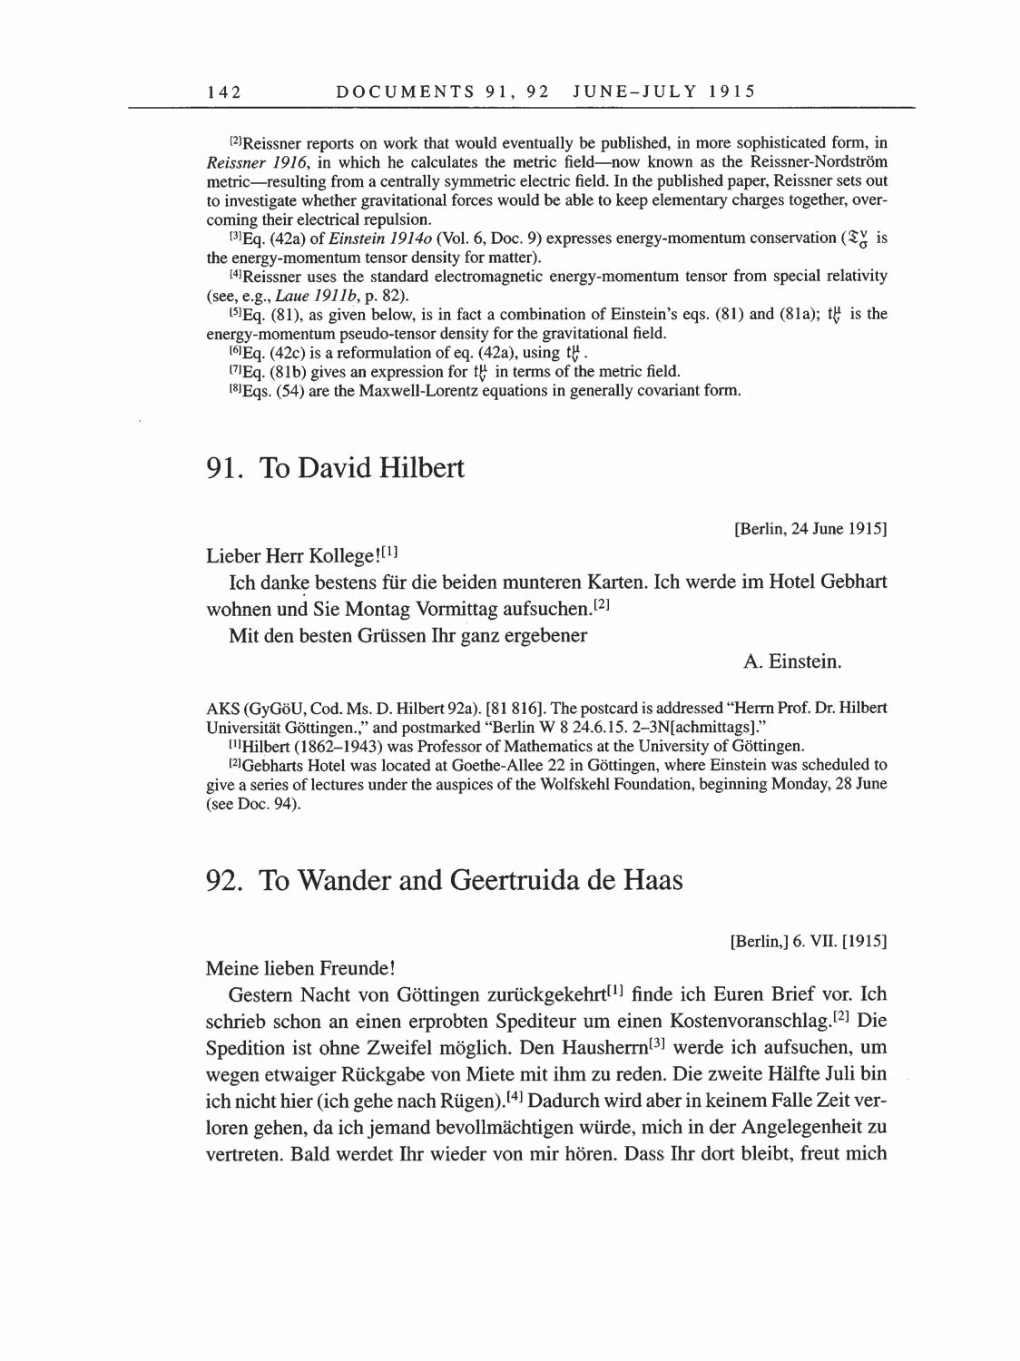 Volume 8, Part A: The Berlin Years: Correspondence 1914-1917 page 142